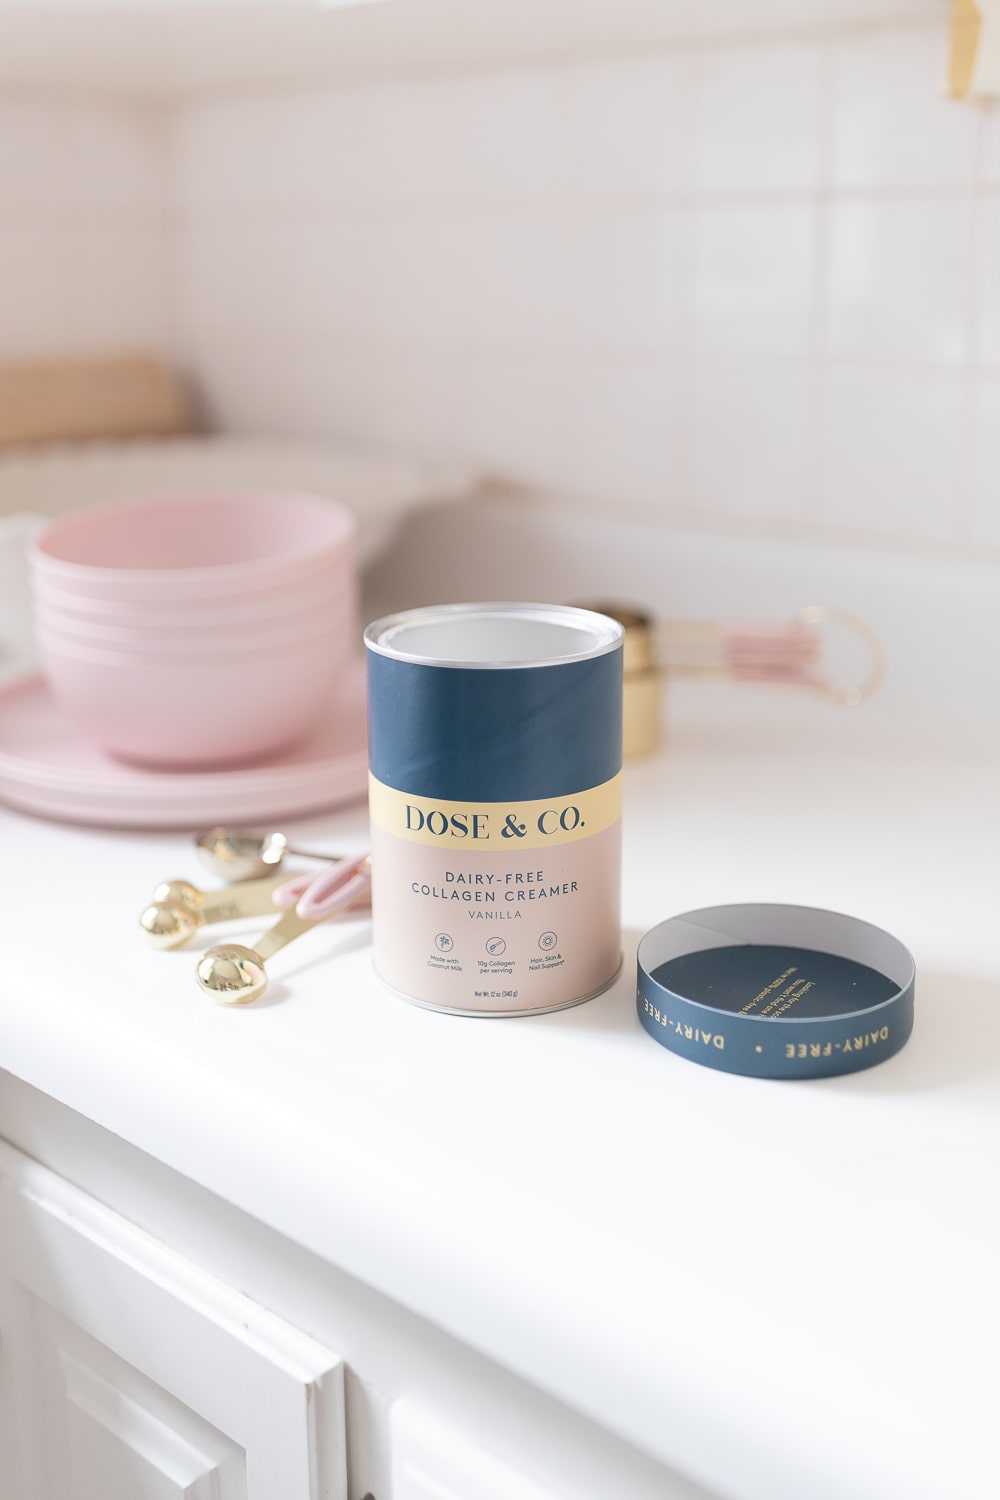 Dose & Co Dairy-Free Collagen Creamer photographed by blogger Stephanie Ziajka on Diary of a Debutante